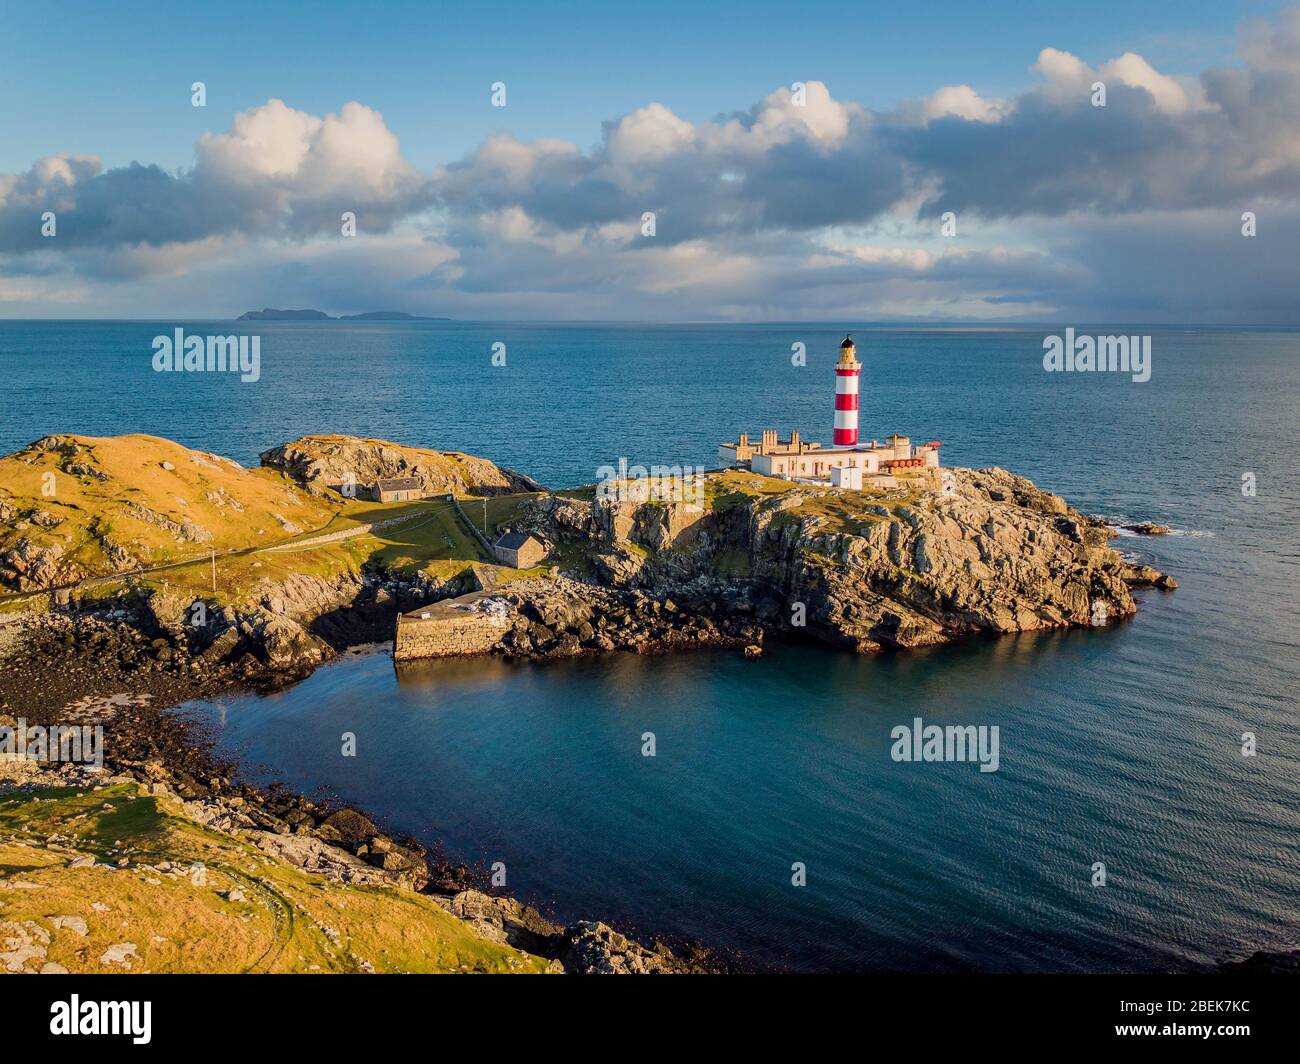 An Aerial photograph overlooking Eilean Glas Lighthouse on the Isle of Scaplay, Outer Hebridies, Scotland Stock Photo